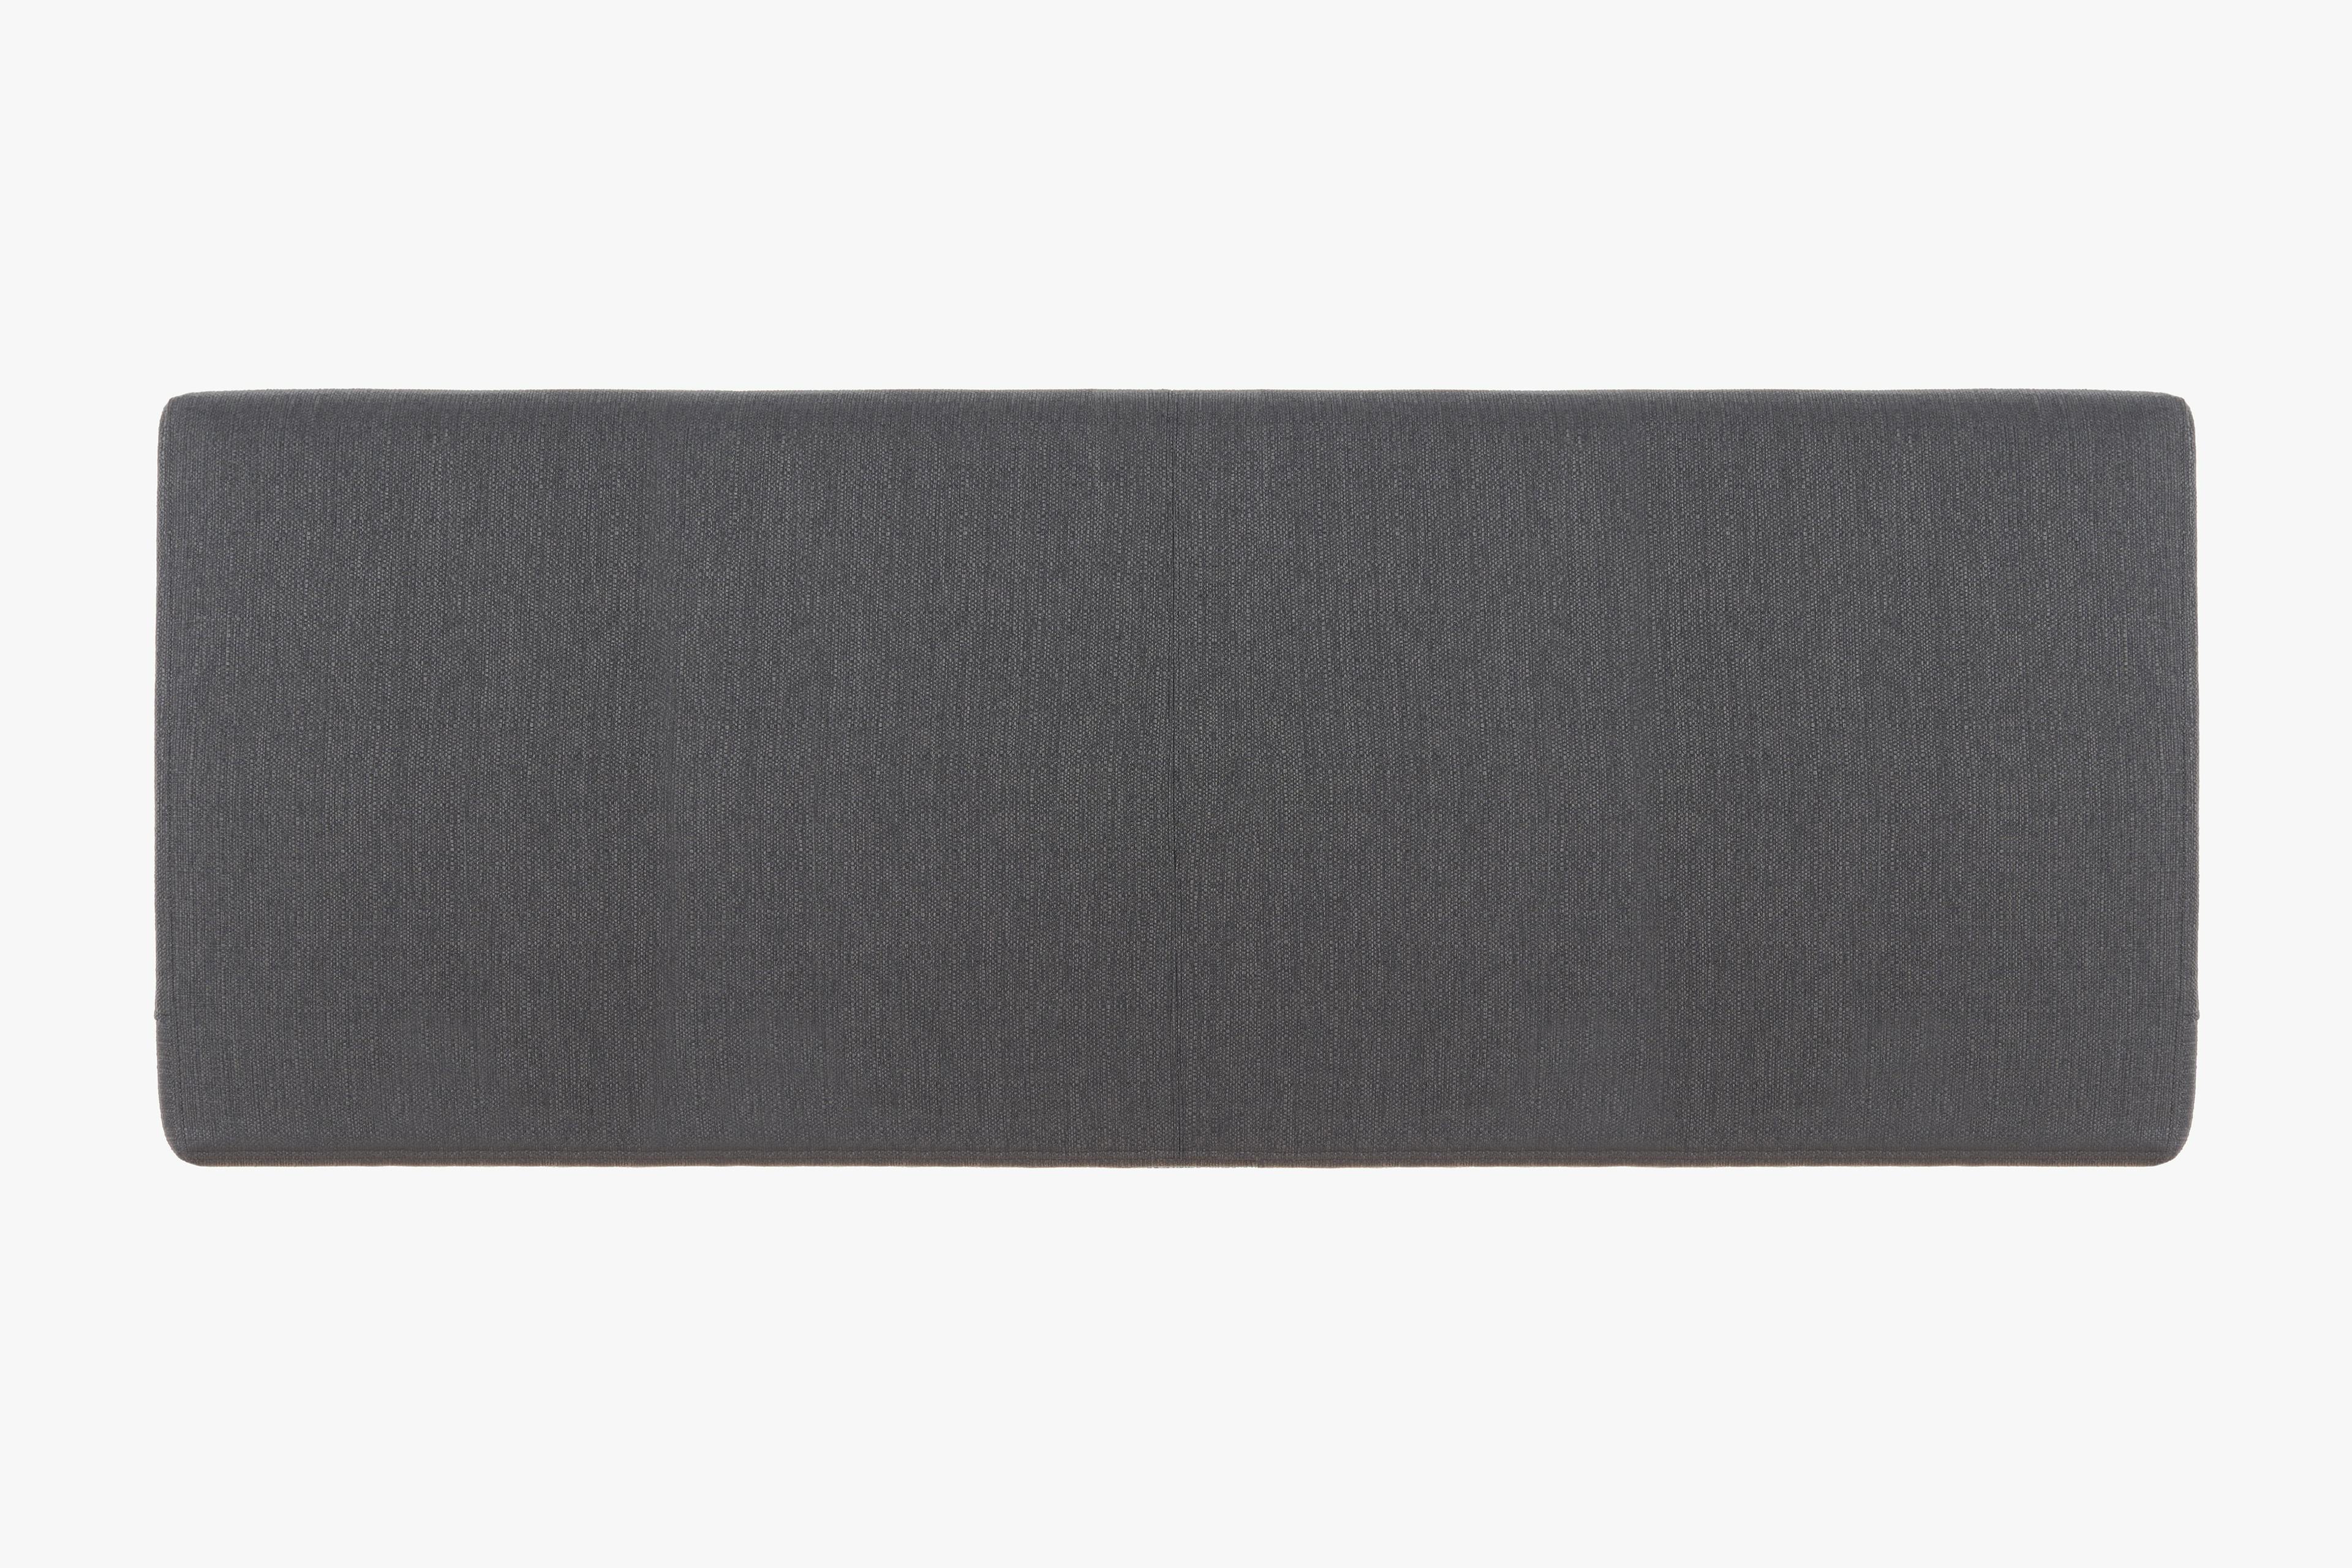 The PillowBoard in Dark Charcoal Color